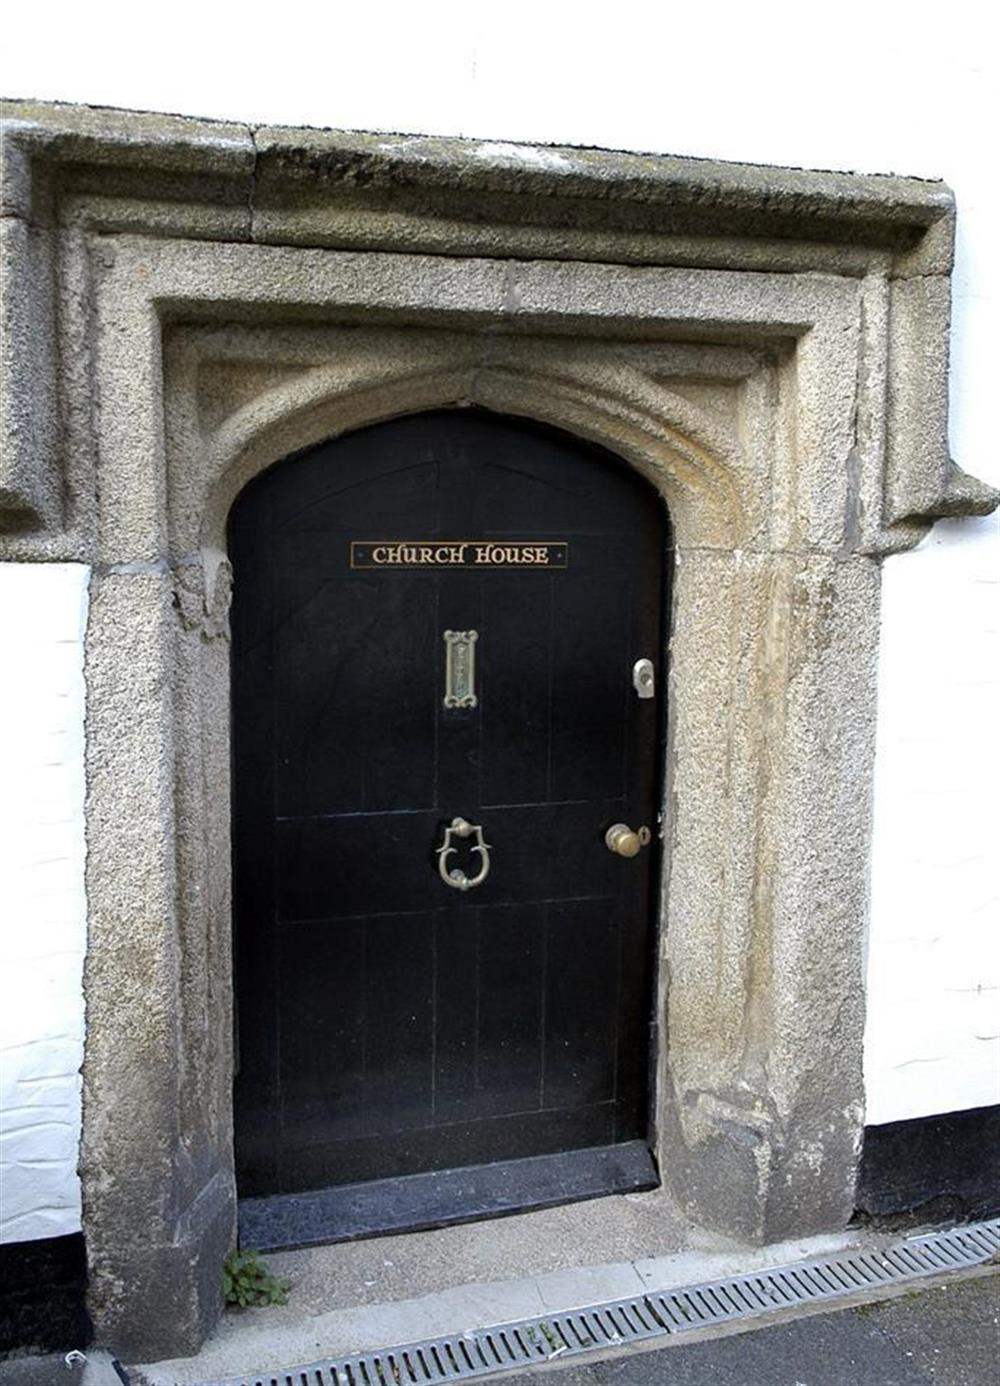 The front door of Church House at Church House, Looe